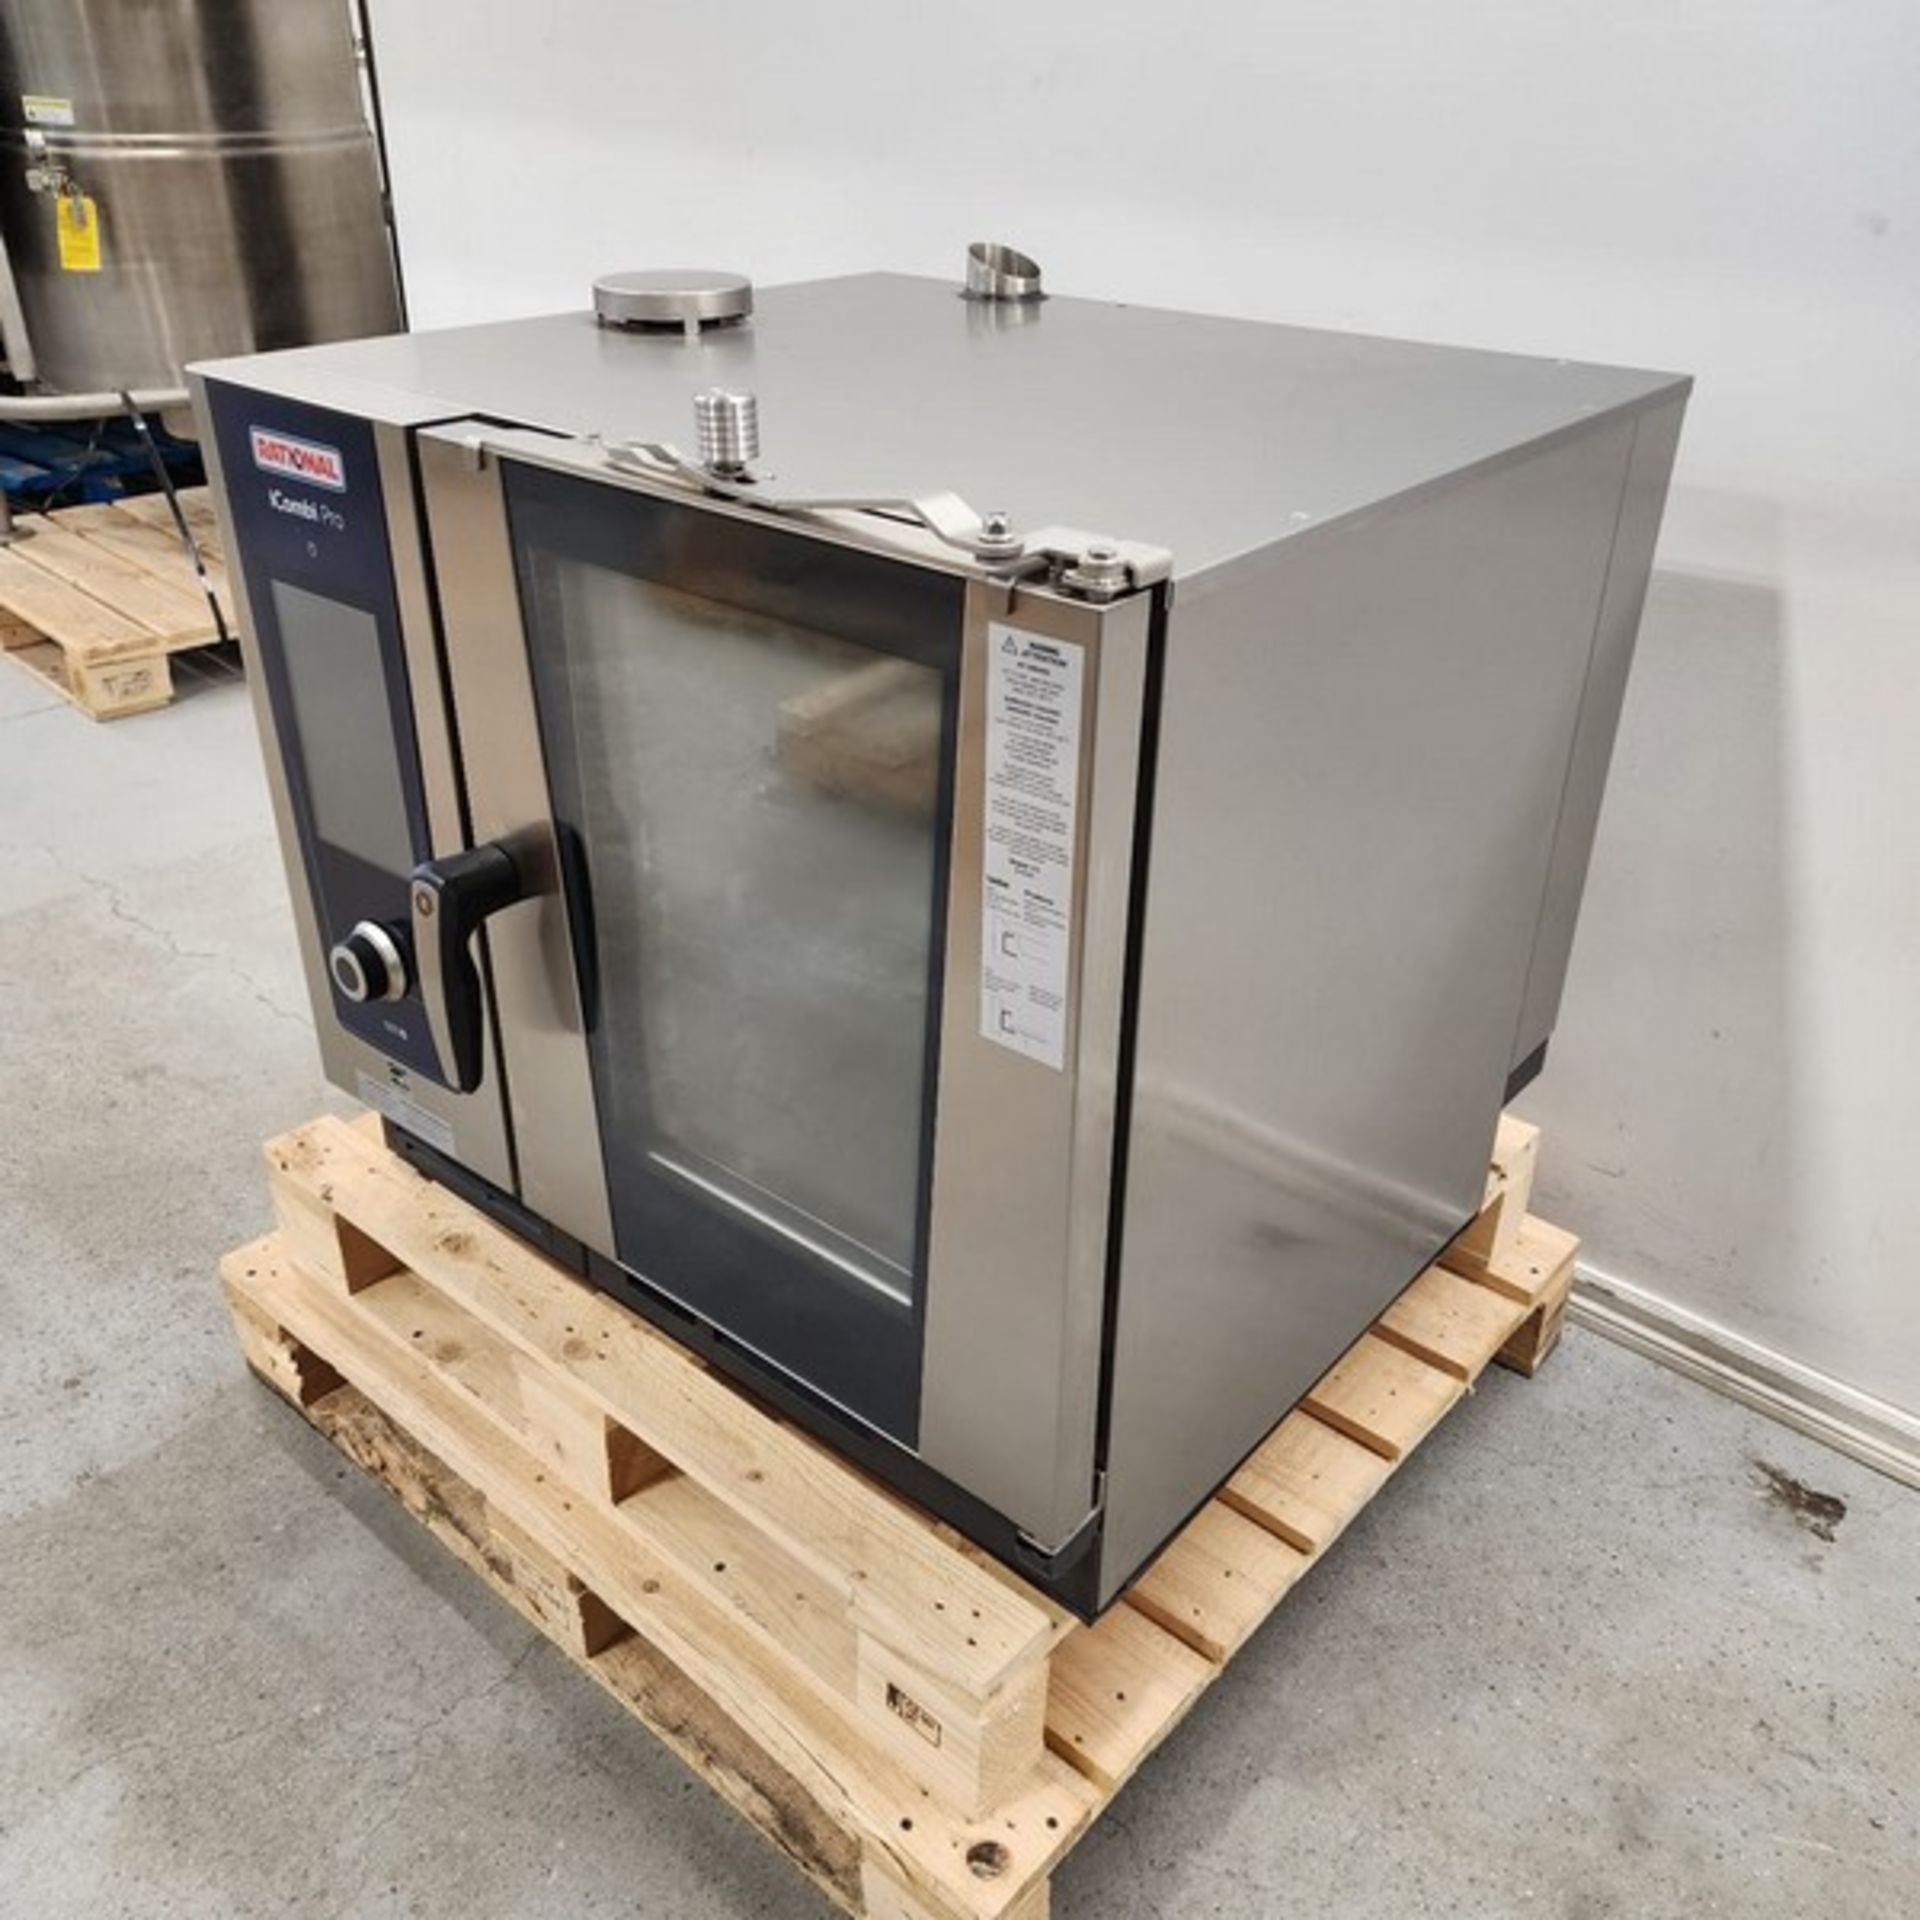 RATIONAL COMBI OVEN **BRAND NEW CONDITION** AG Model ICOMBI PRO Never been plugged in 440/480 volts - Image 2 of 7